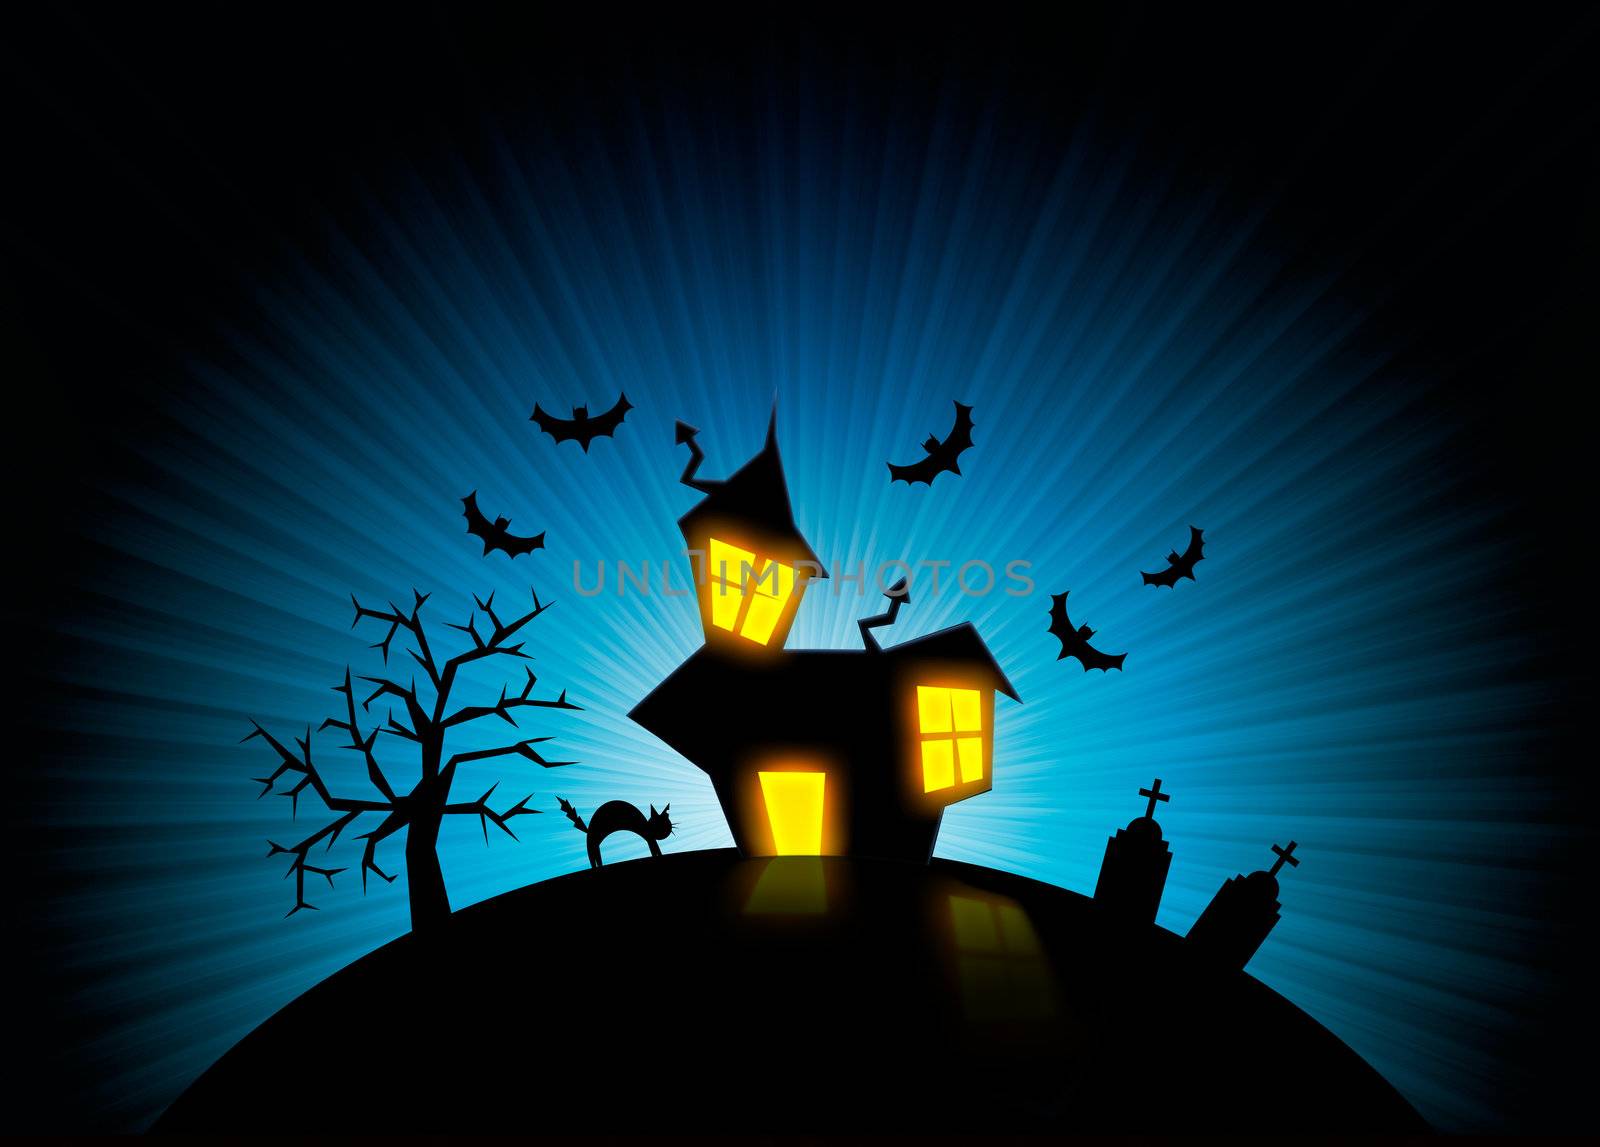 Terror night halloween background with house, cat, tombs and trees.